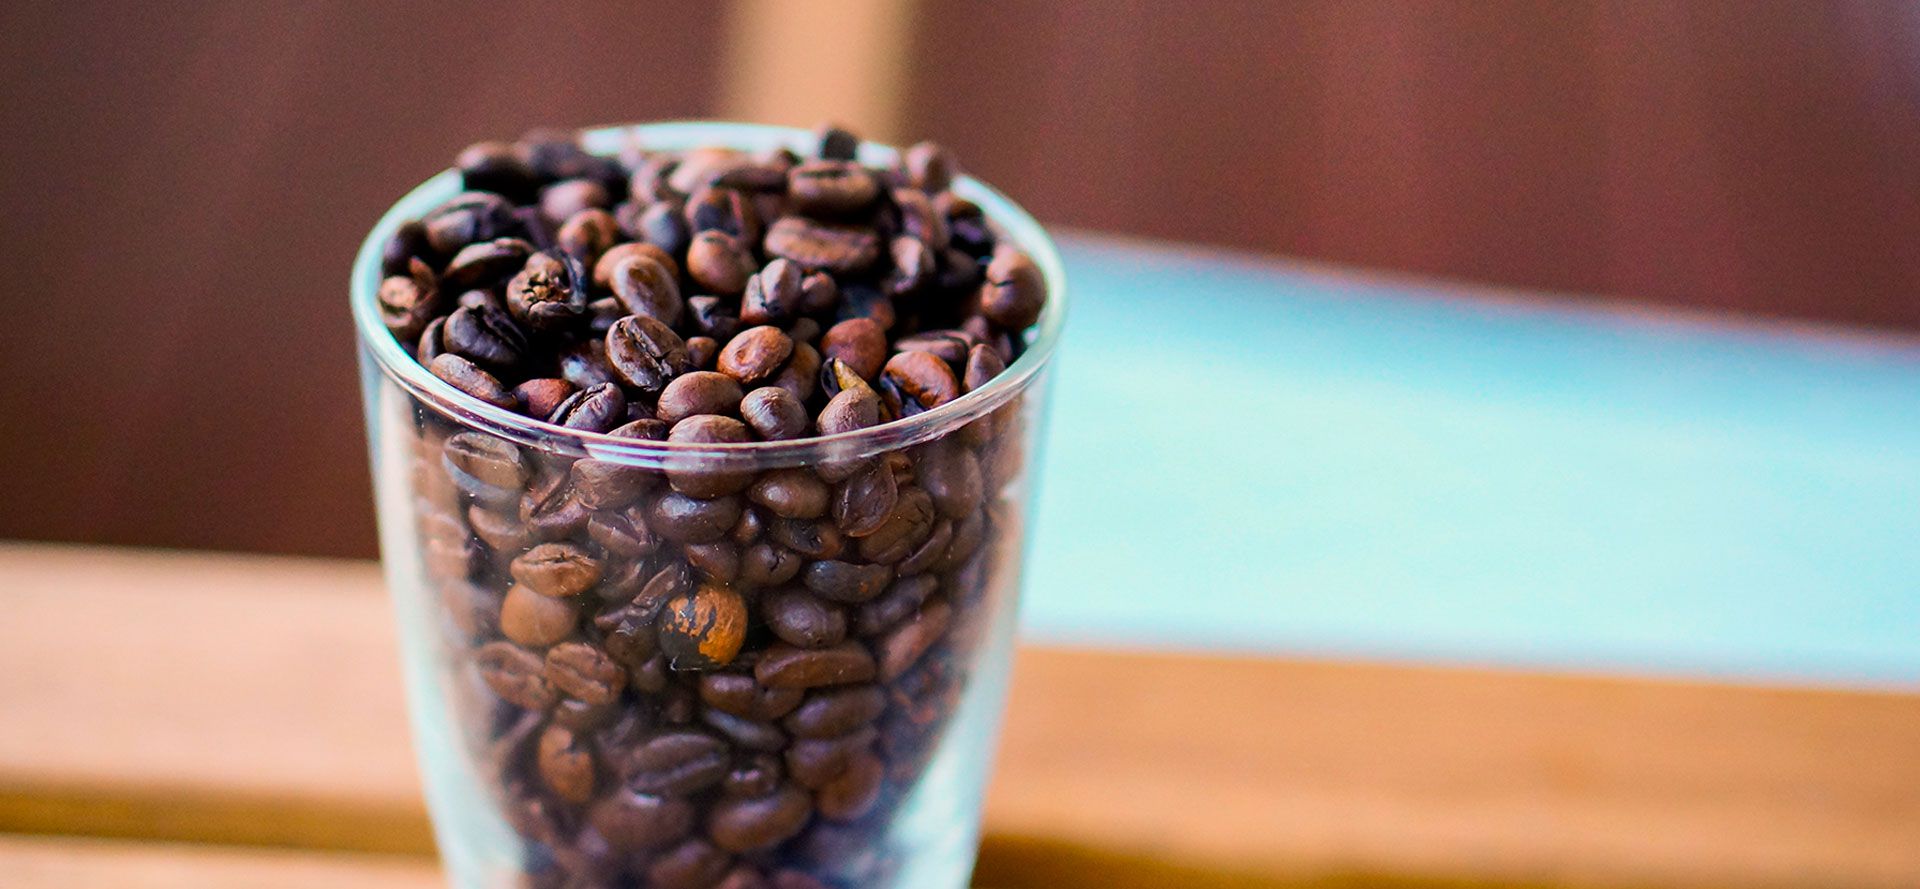 Robusta Beans in a Glass.